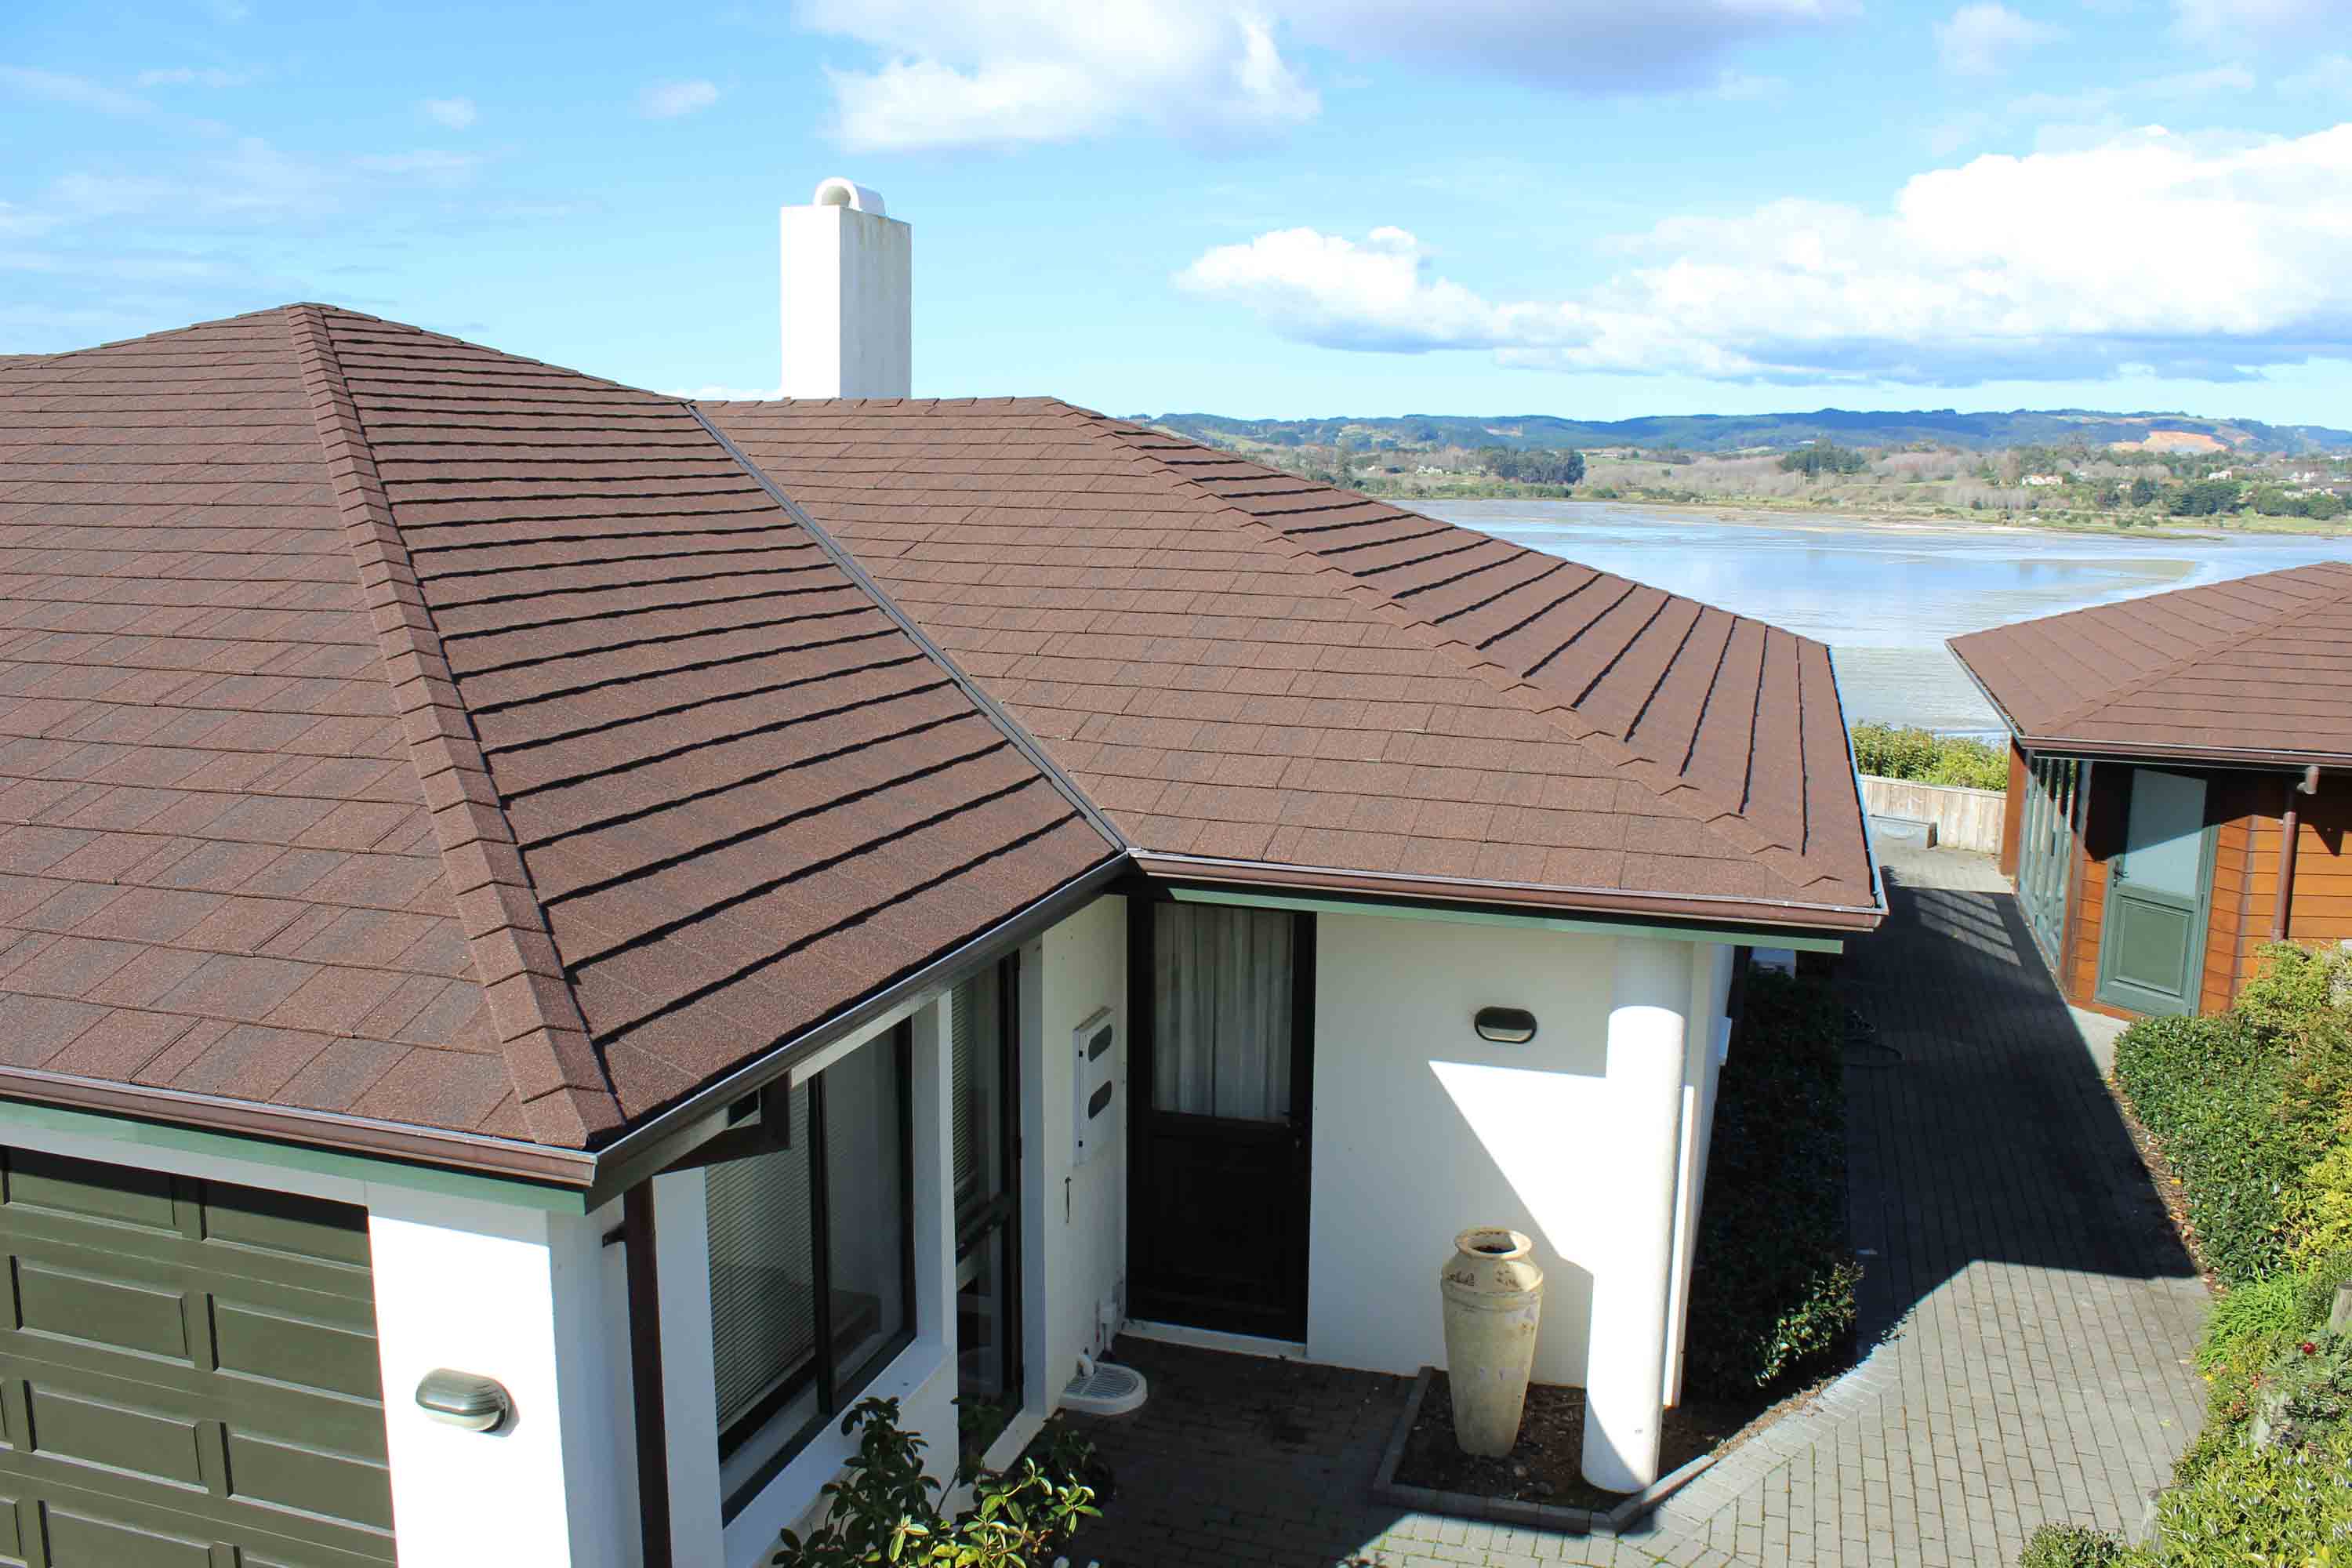 Coastal property roofed with CF Slate metal roof - looking over the roof to the water.